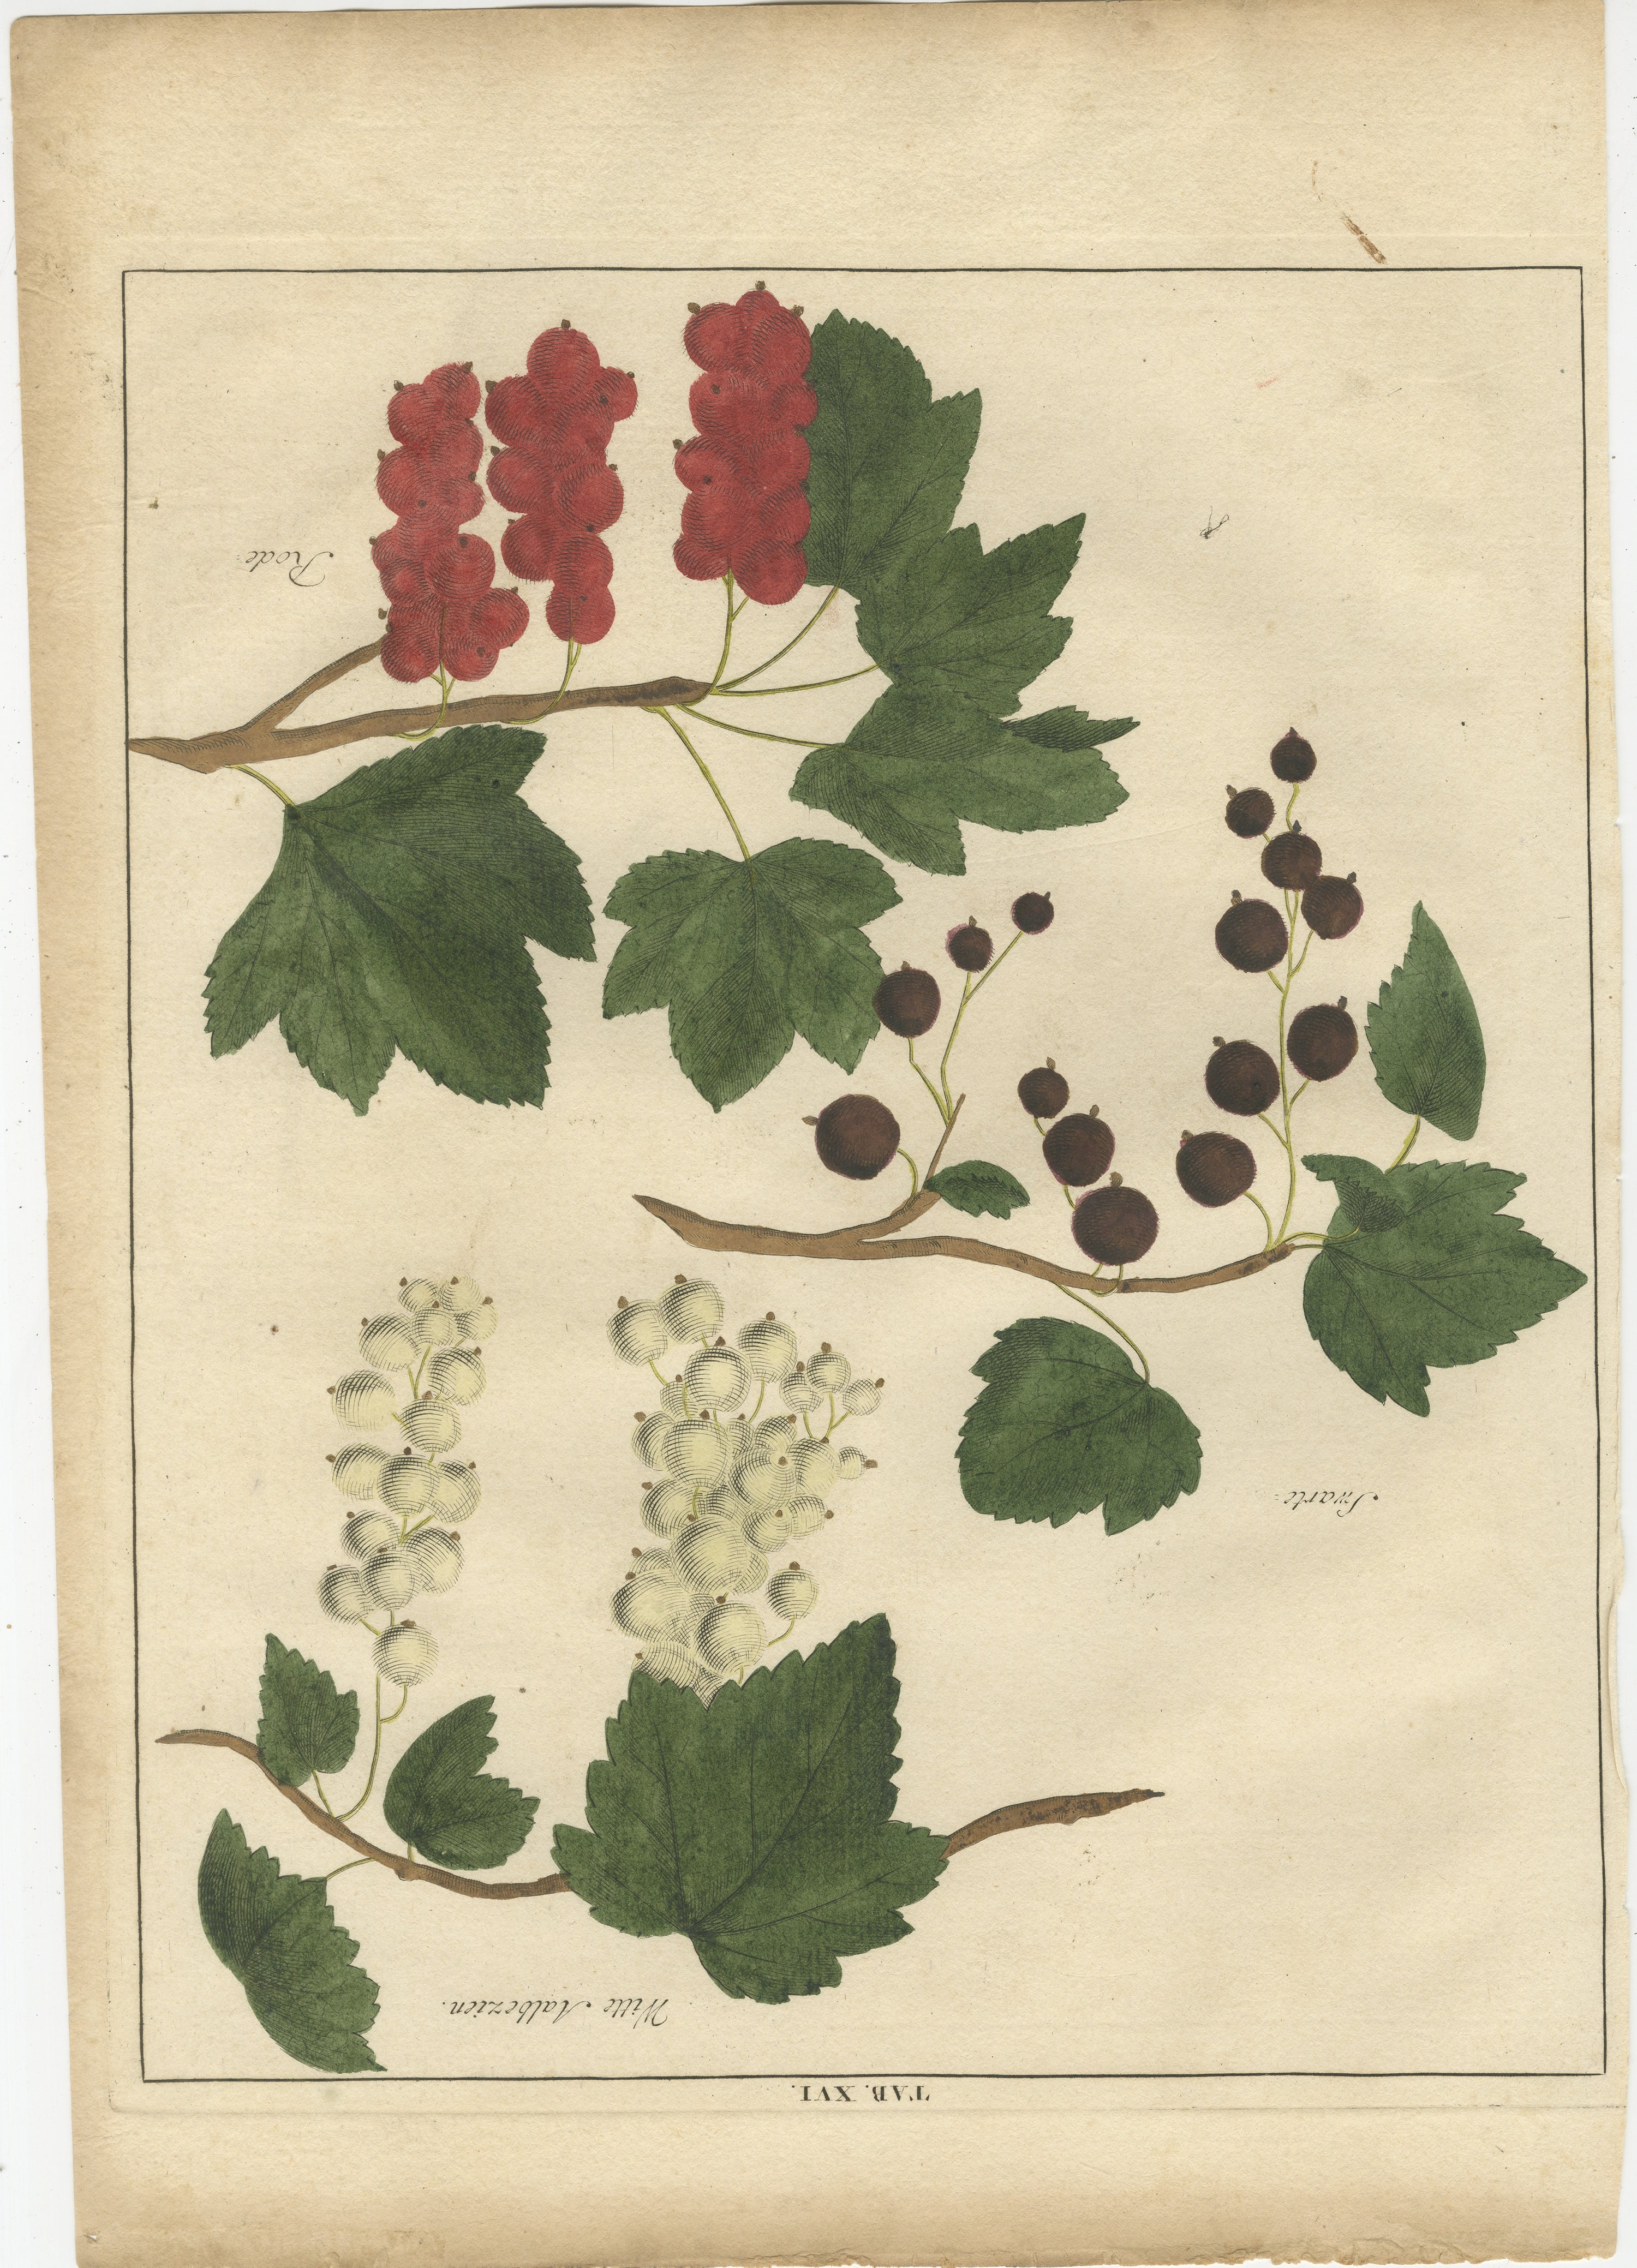 Antique print of white, black and red currants. Originates from 'Pomologia' by J. H. Knoop.

Artists and Engravers: Published by Johann Hermann Knoop (c.1700-1769).

Condition: Good, general age-related toning. Minor wear, blank verso. Please